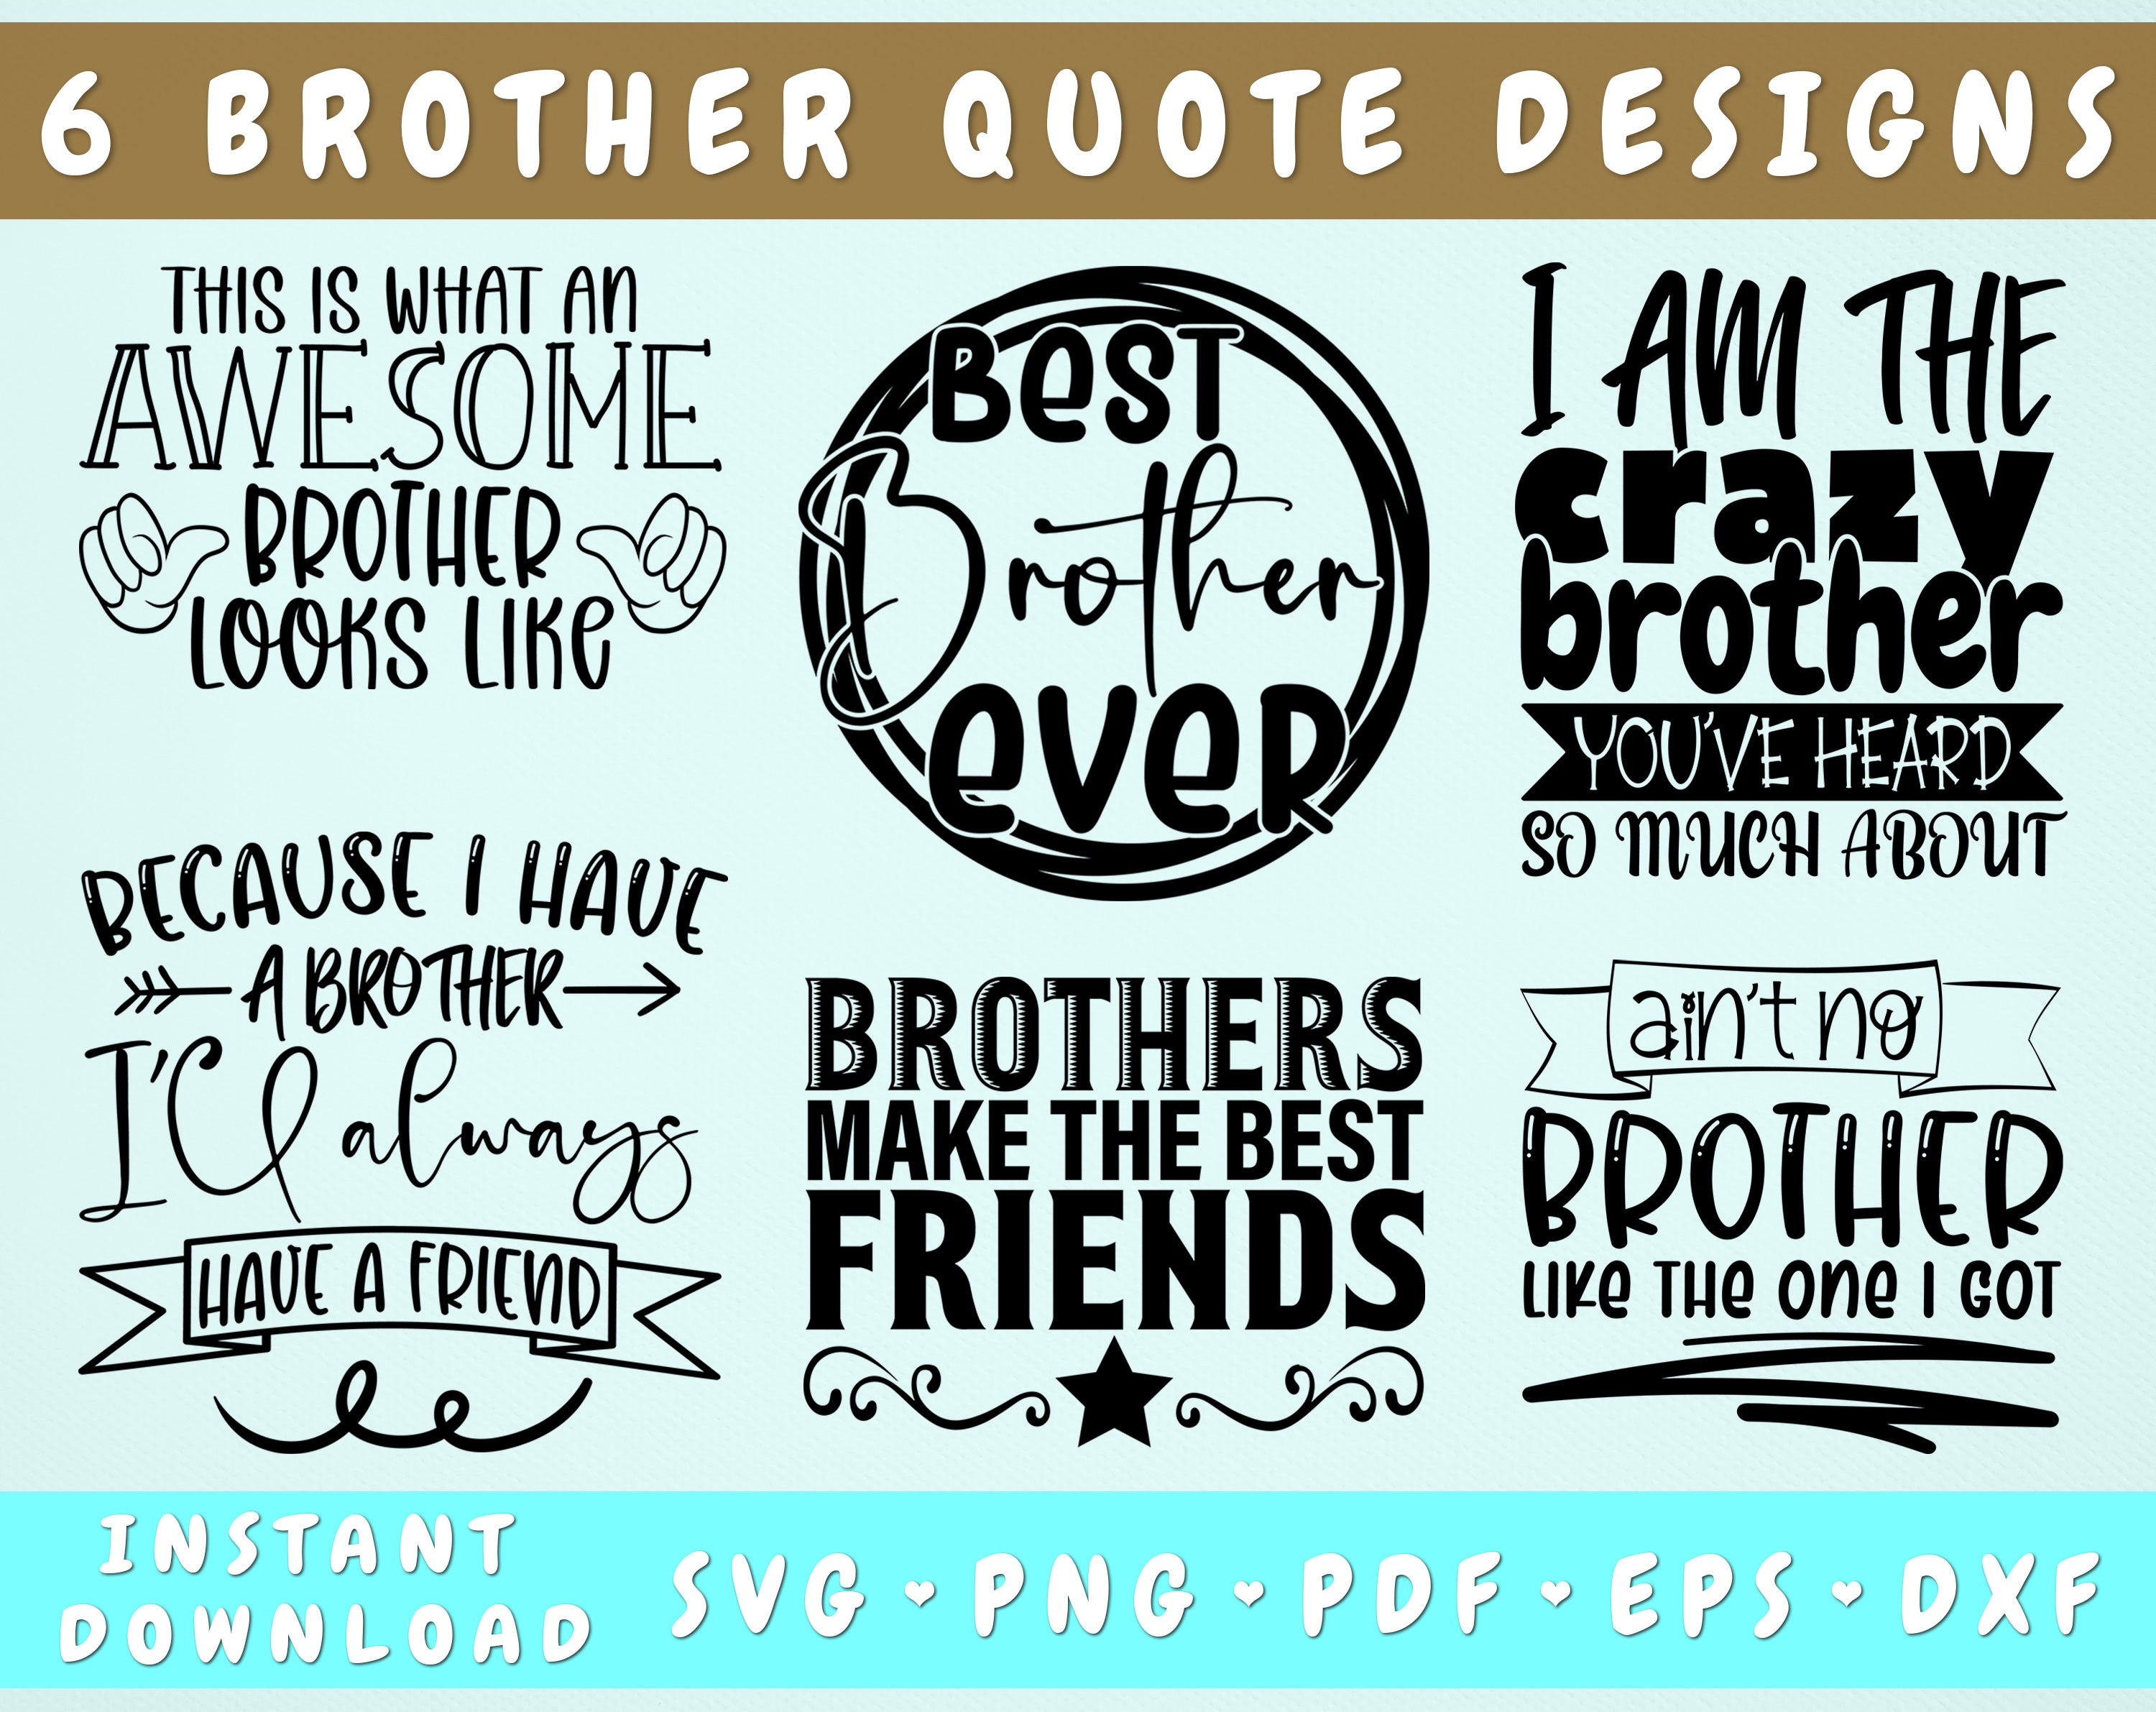 brothers quotes and sayings